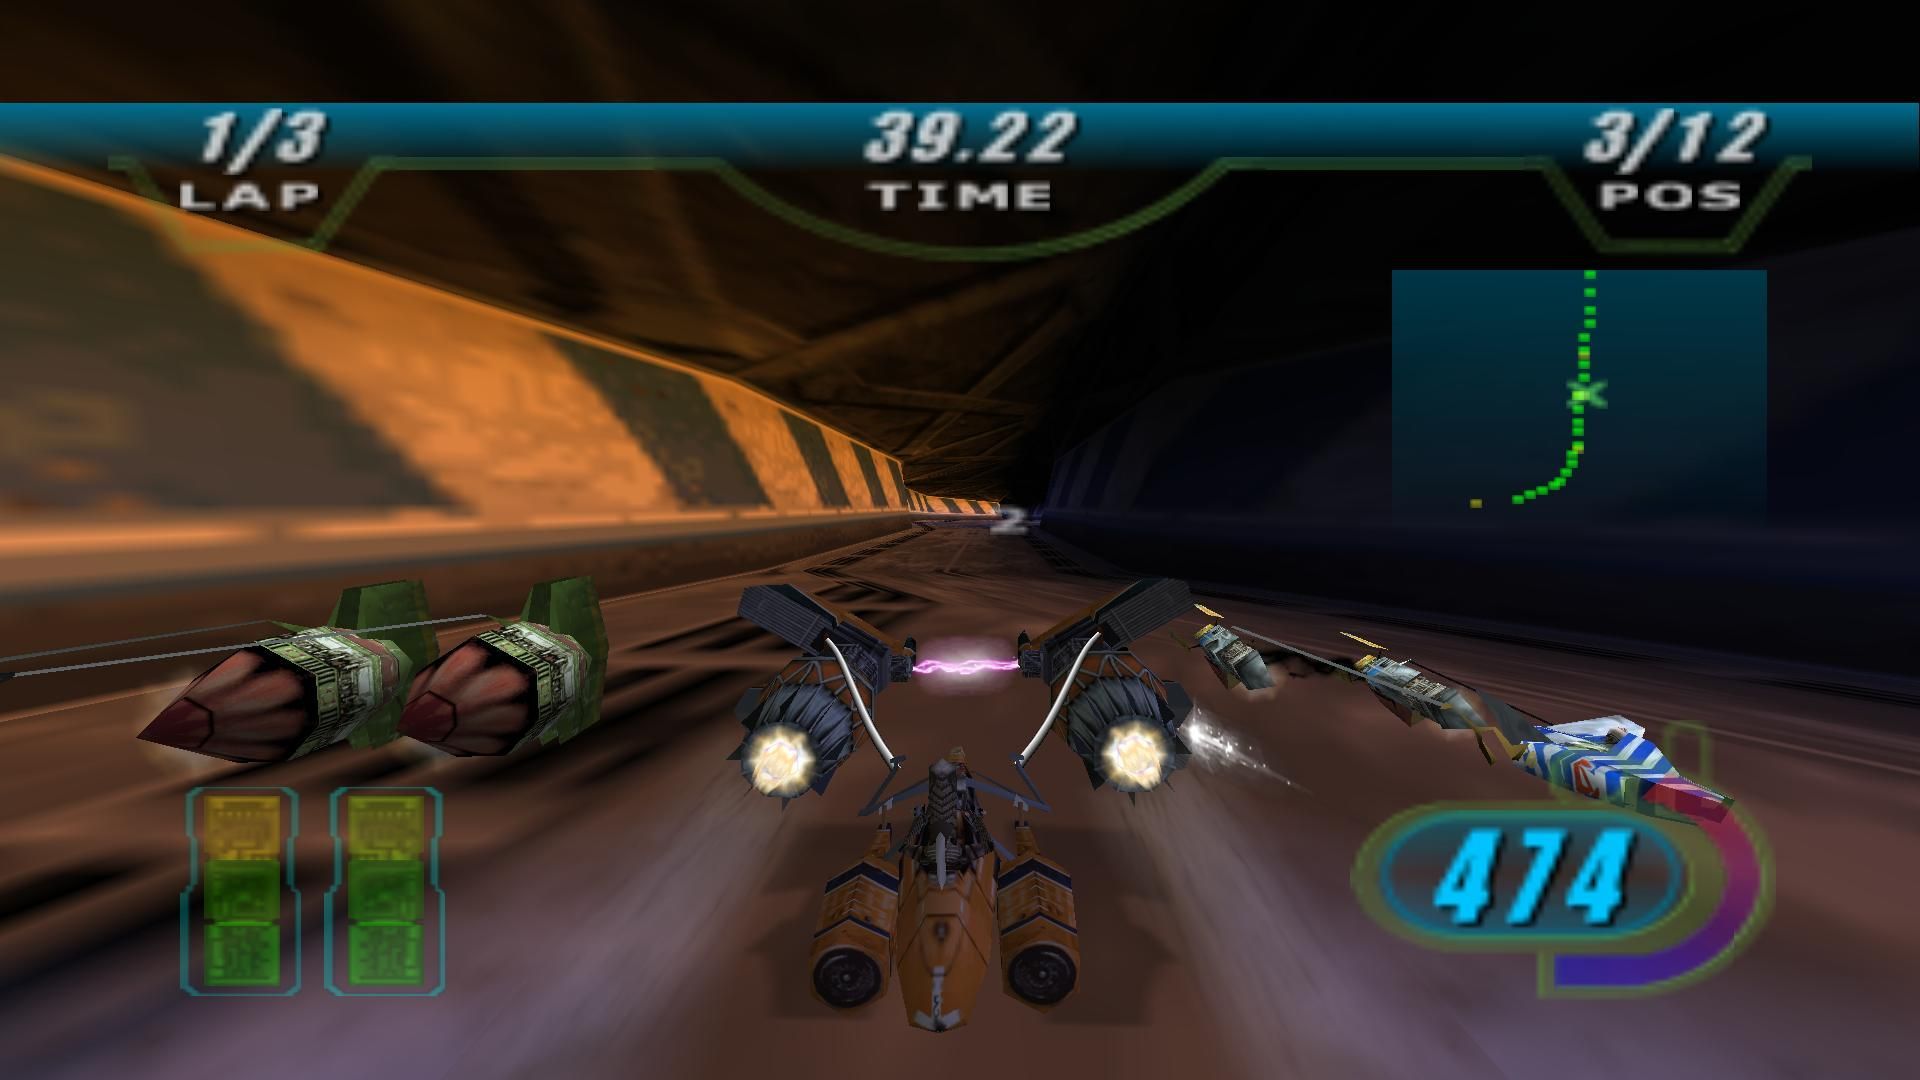 Now THIS Is Podracing! Star Wars Episode I Racer Steam Release Is